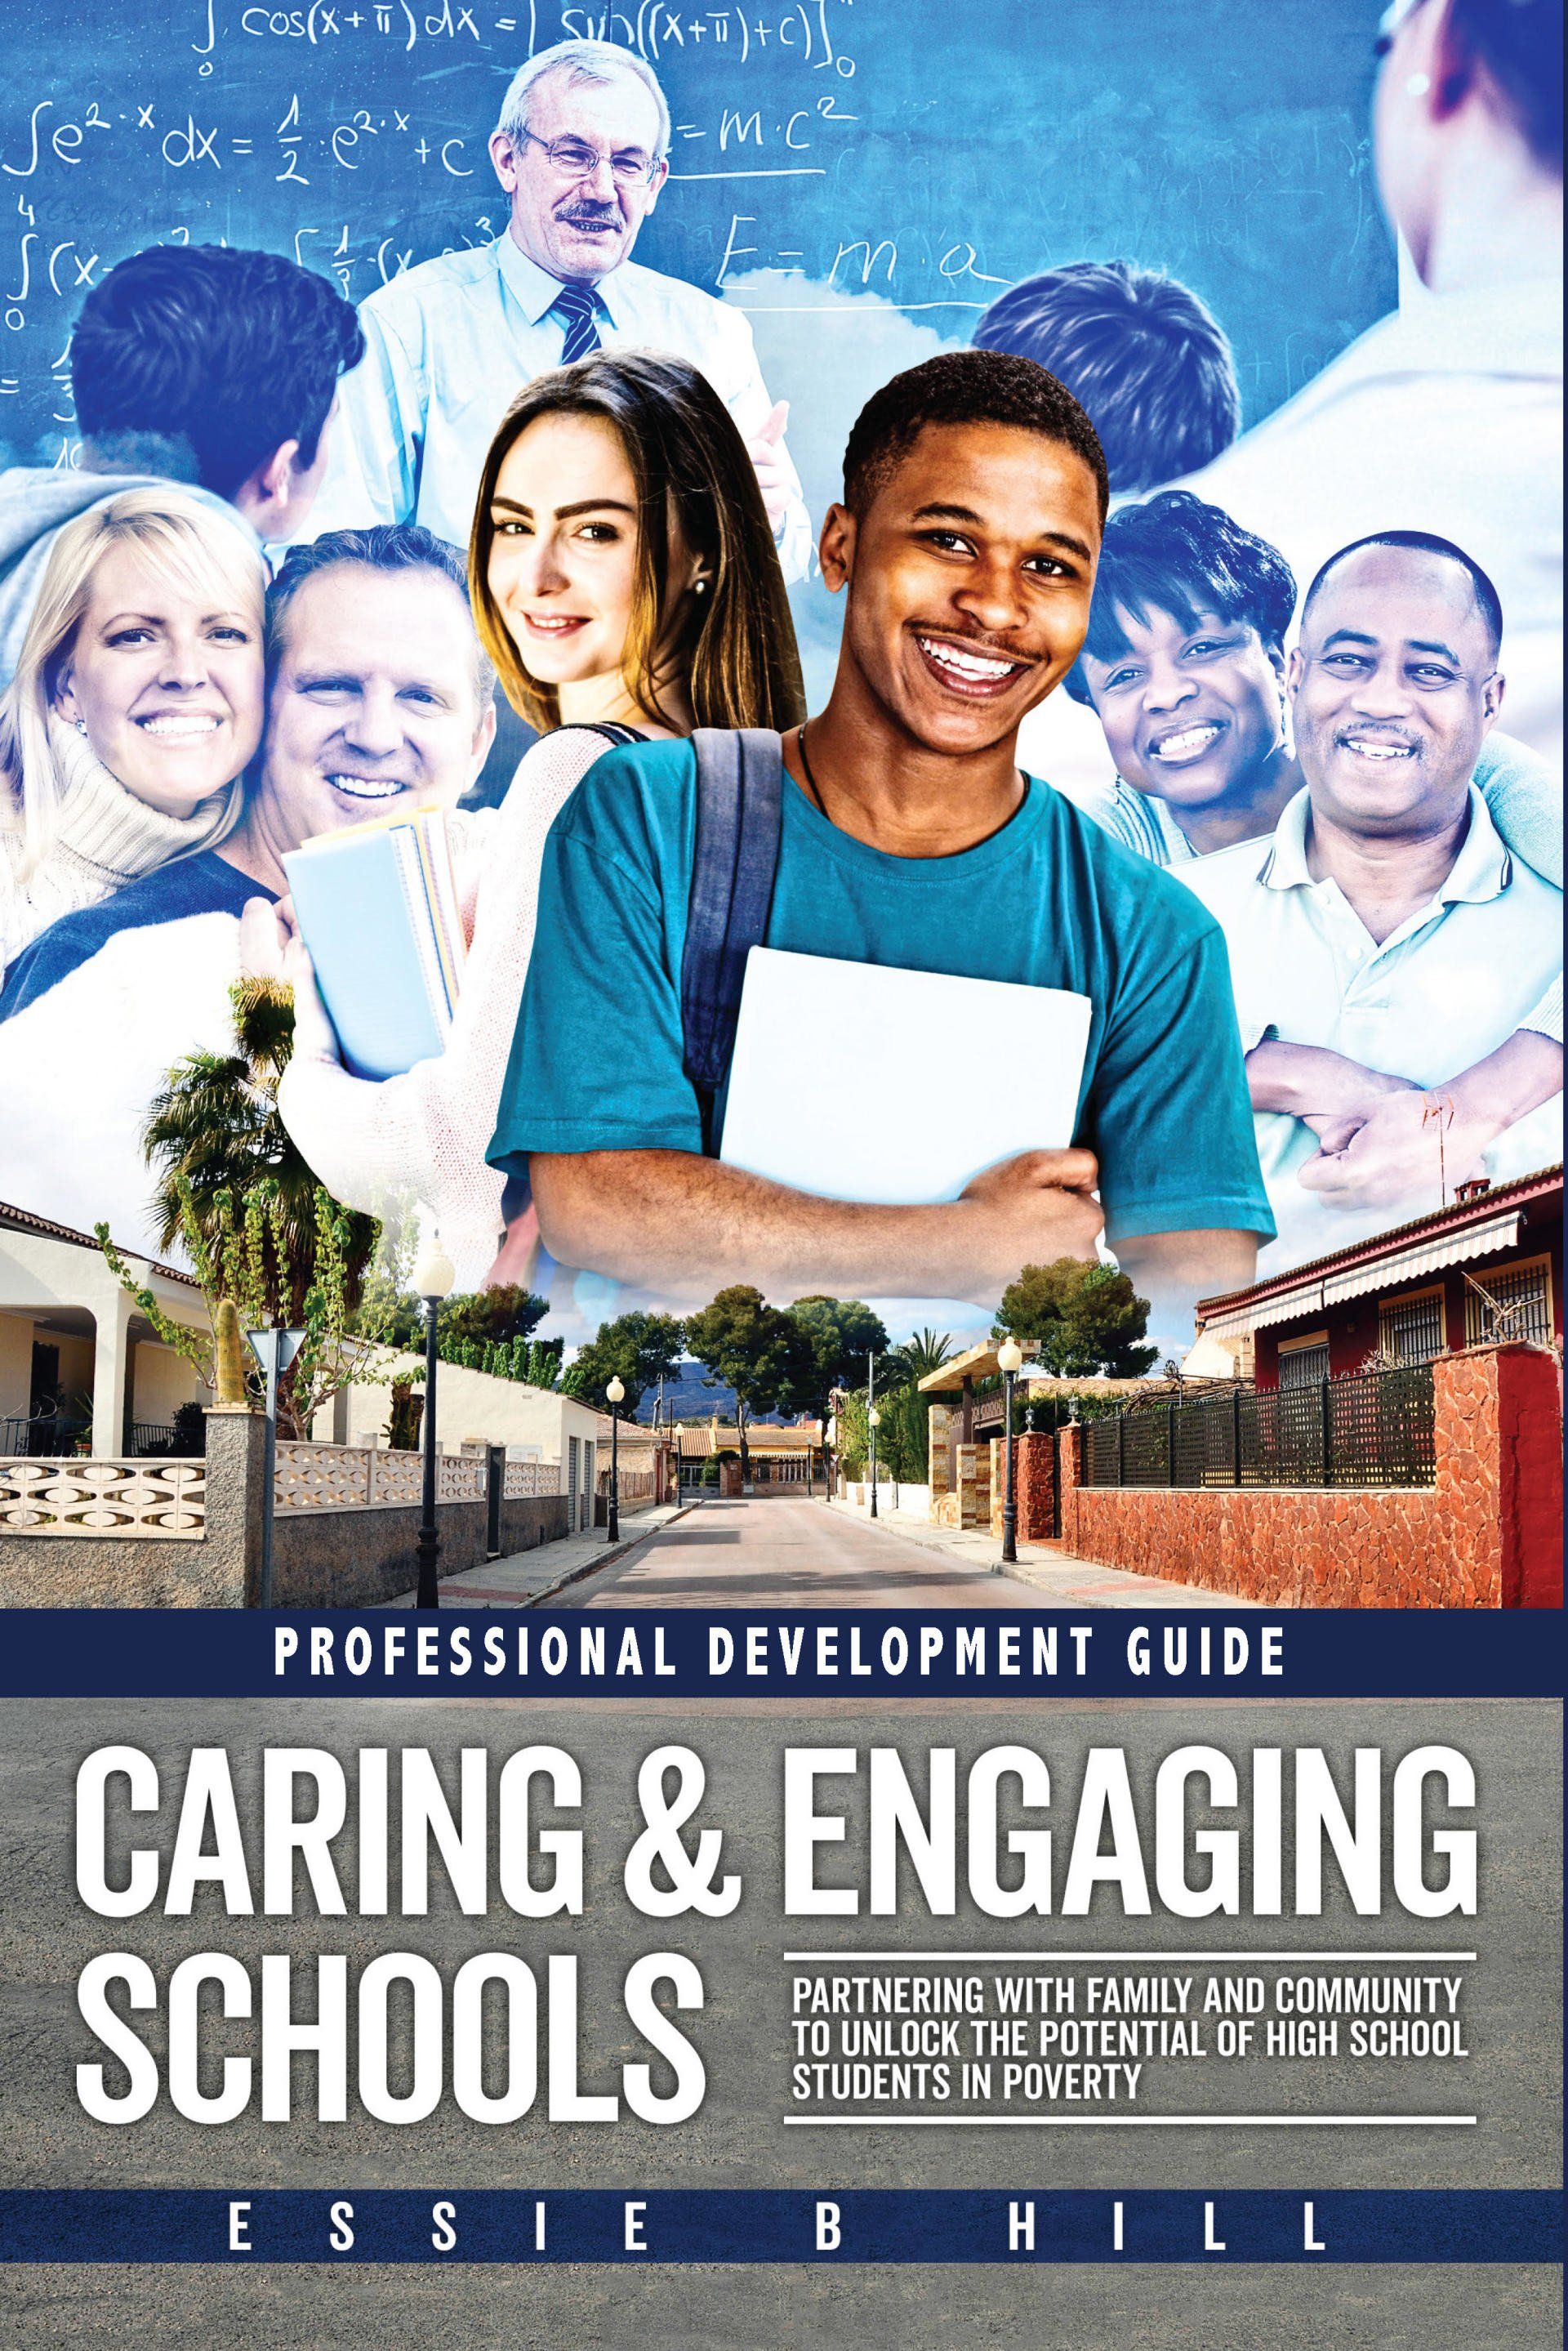 Caring & Engaging Schools, Professional Development Guide, book